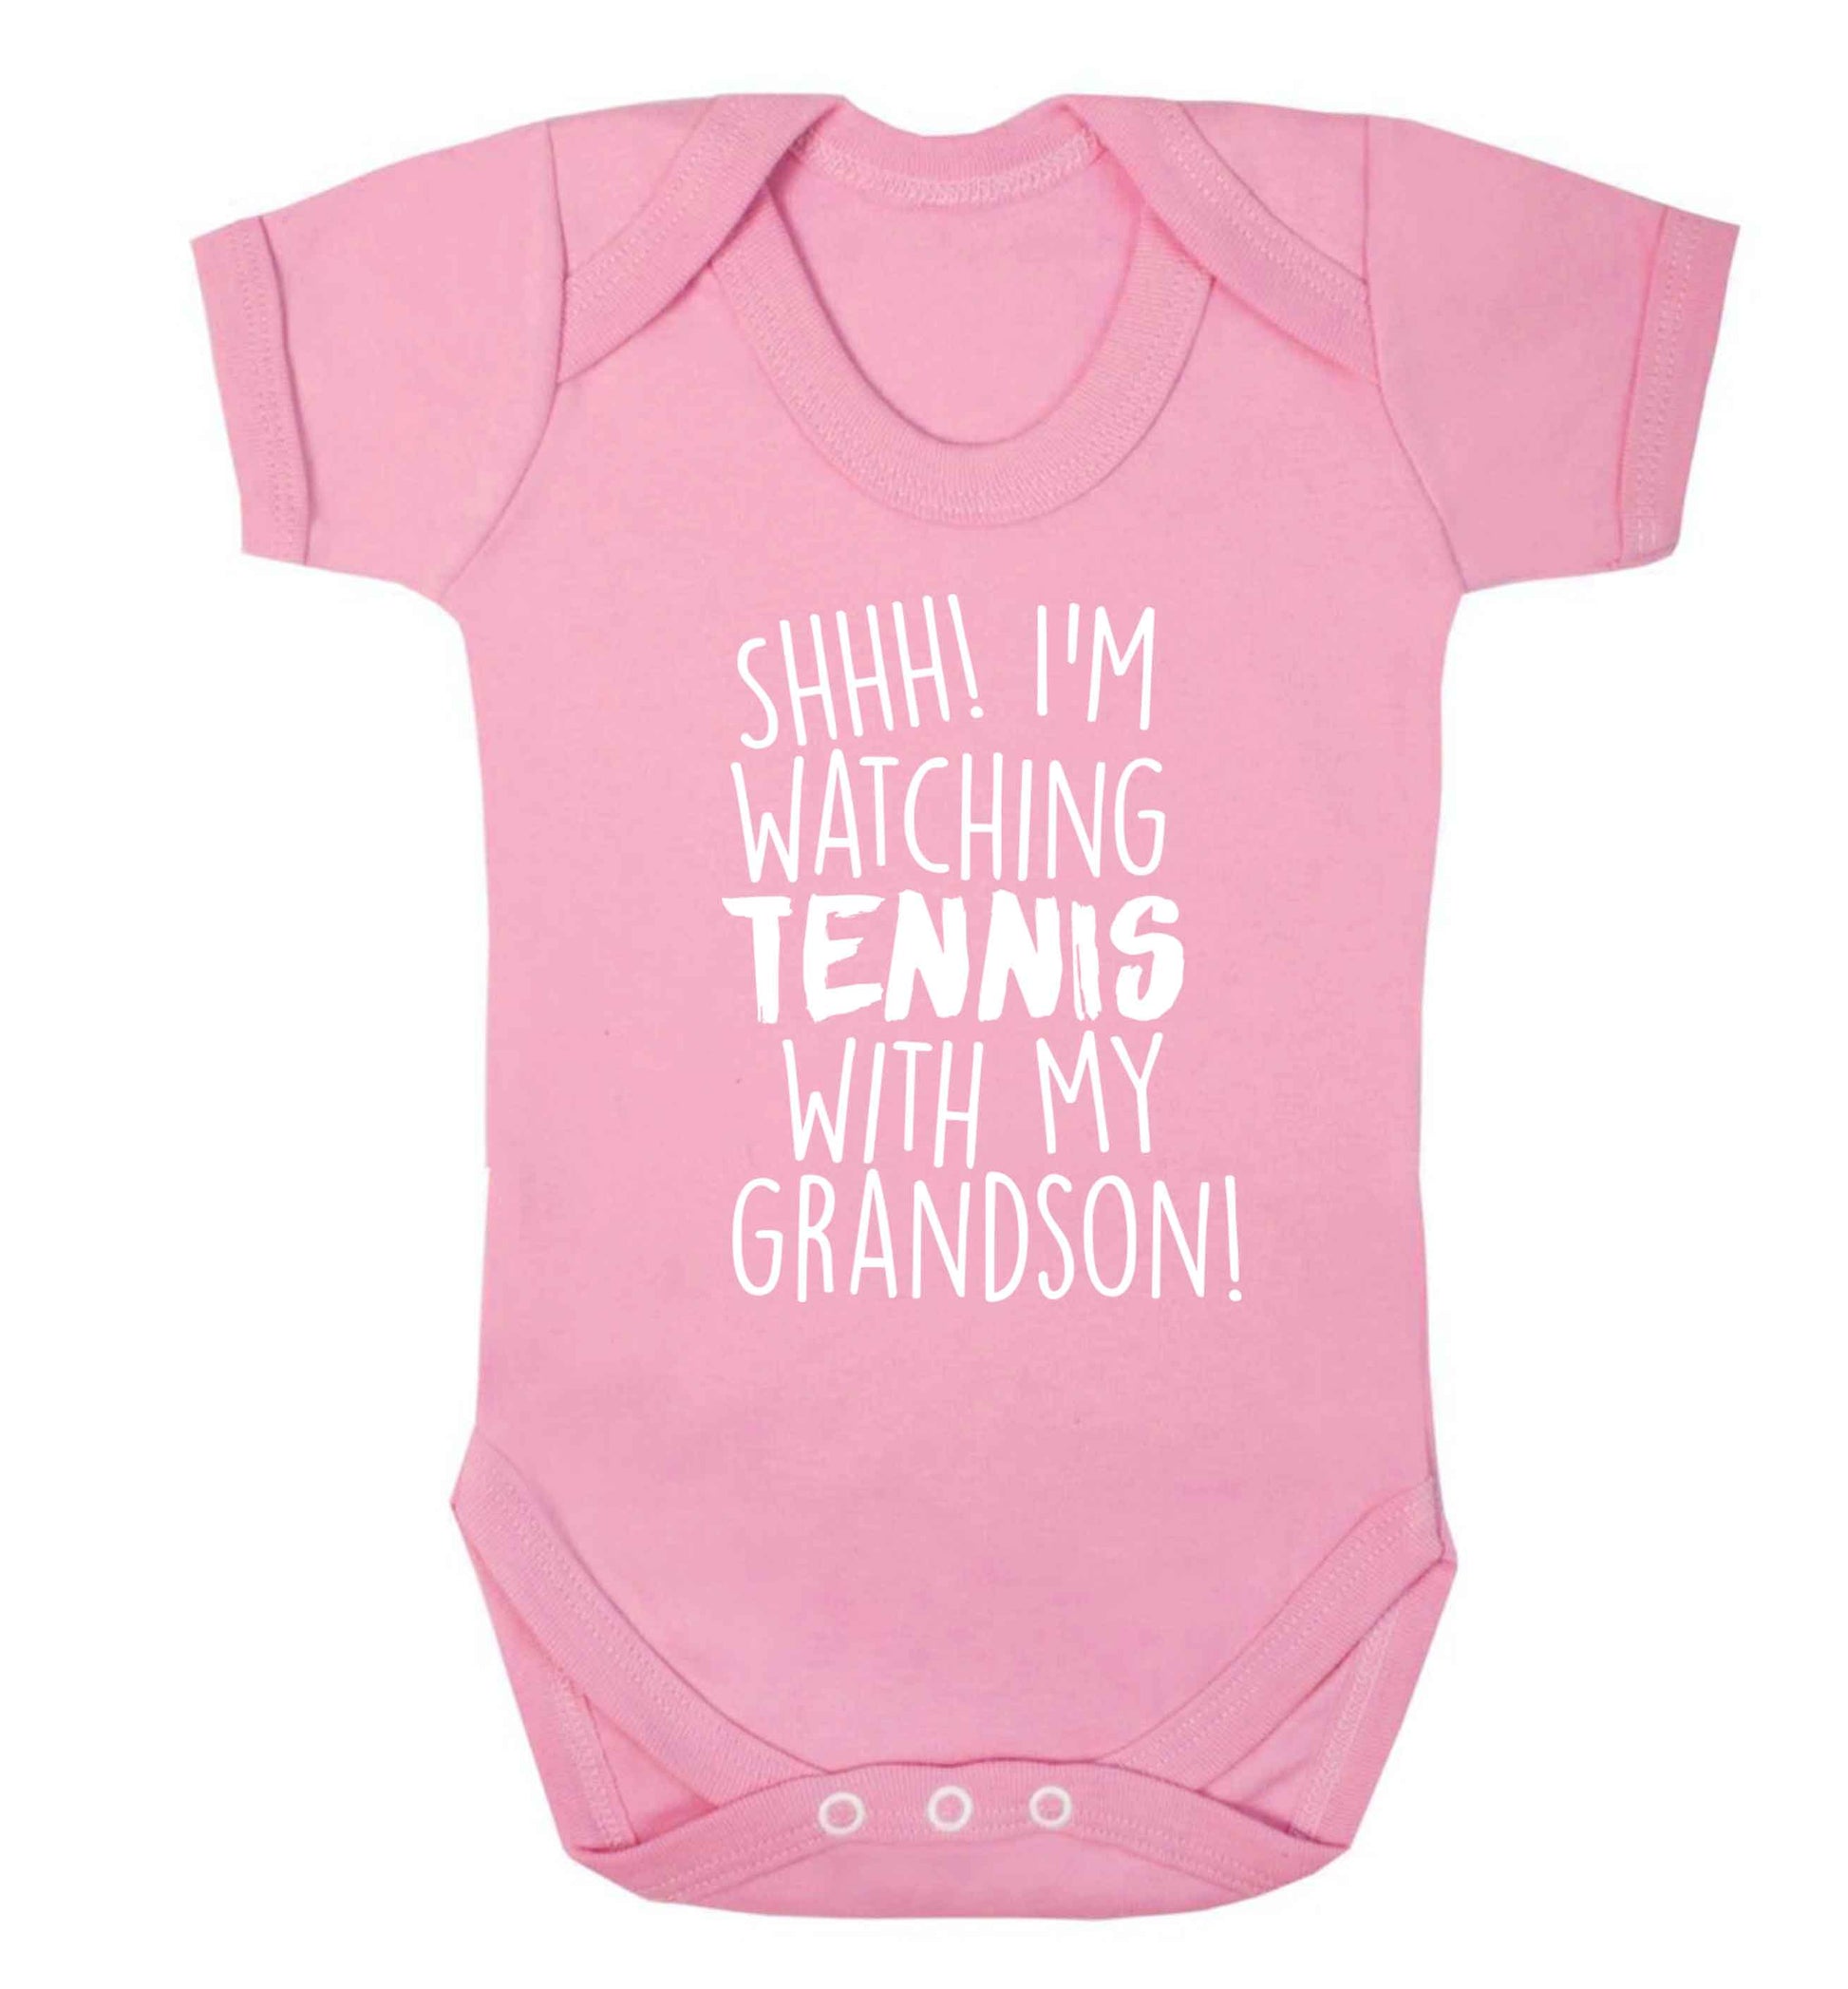 Shh! I'm watching tennis with my grandson! Baby Vest pale pink 18-24 months